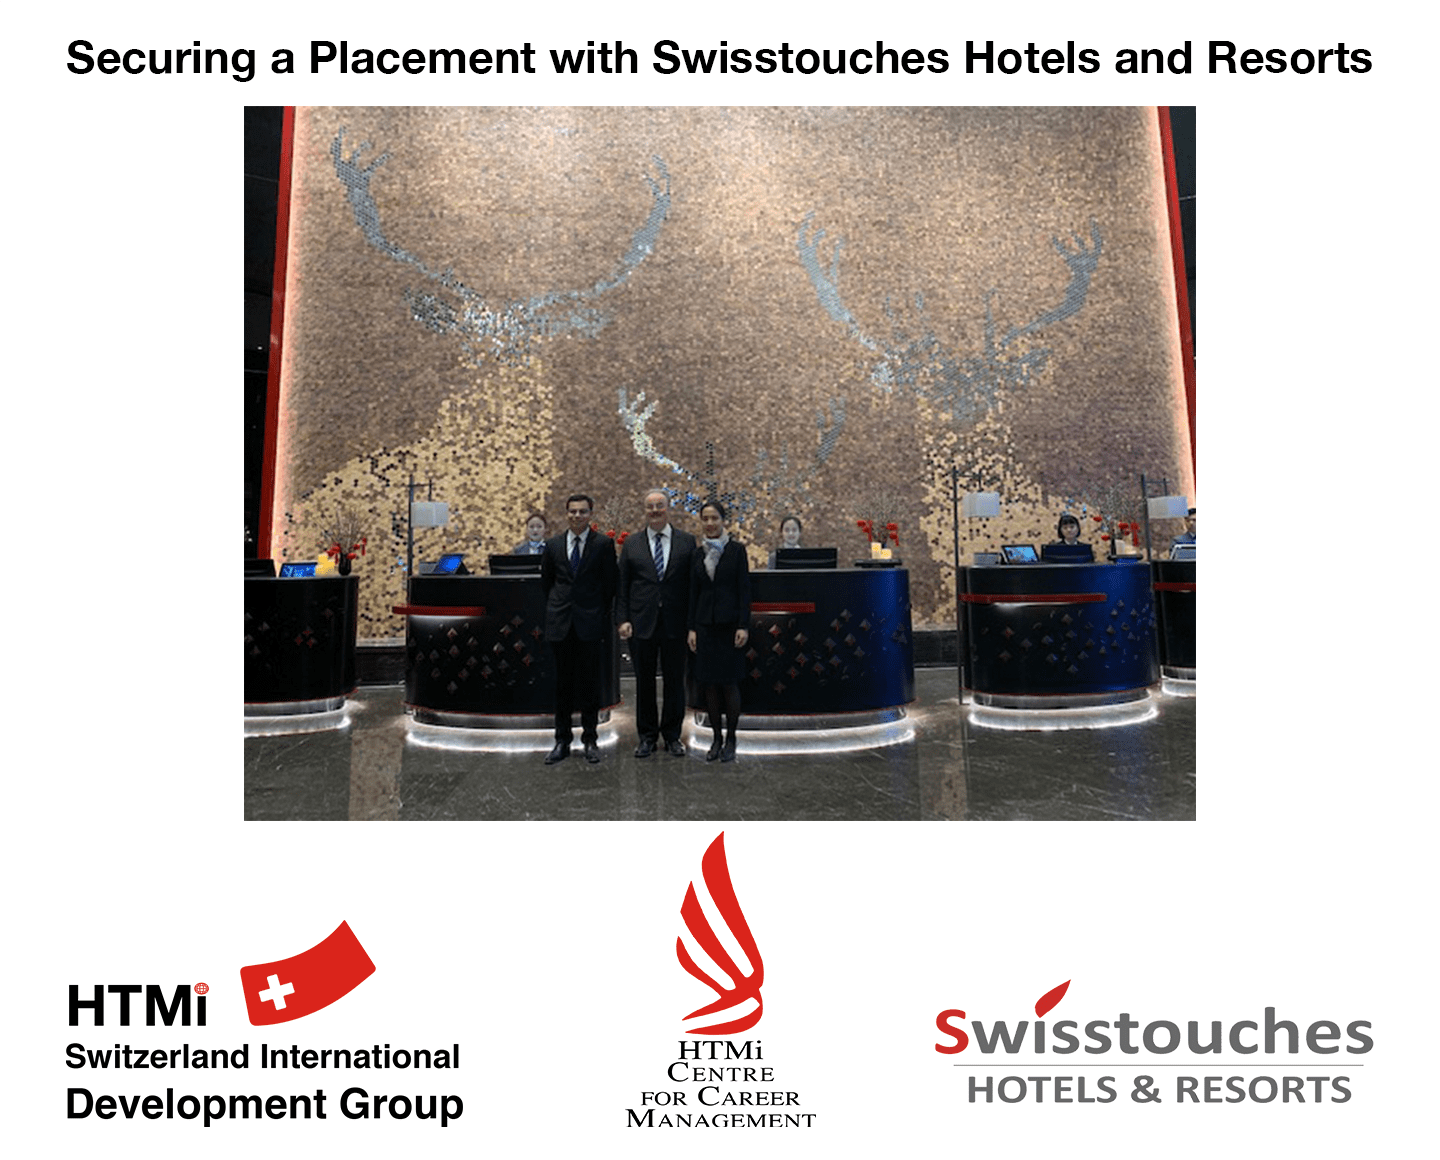 Securing a Placement with Swisstouches Hotels and Resorts